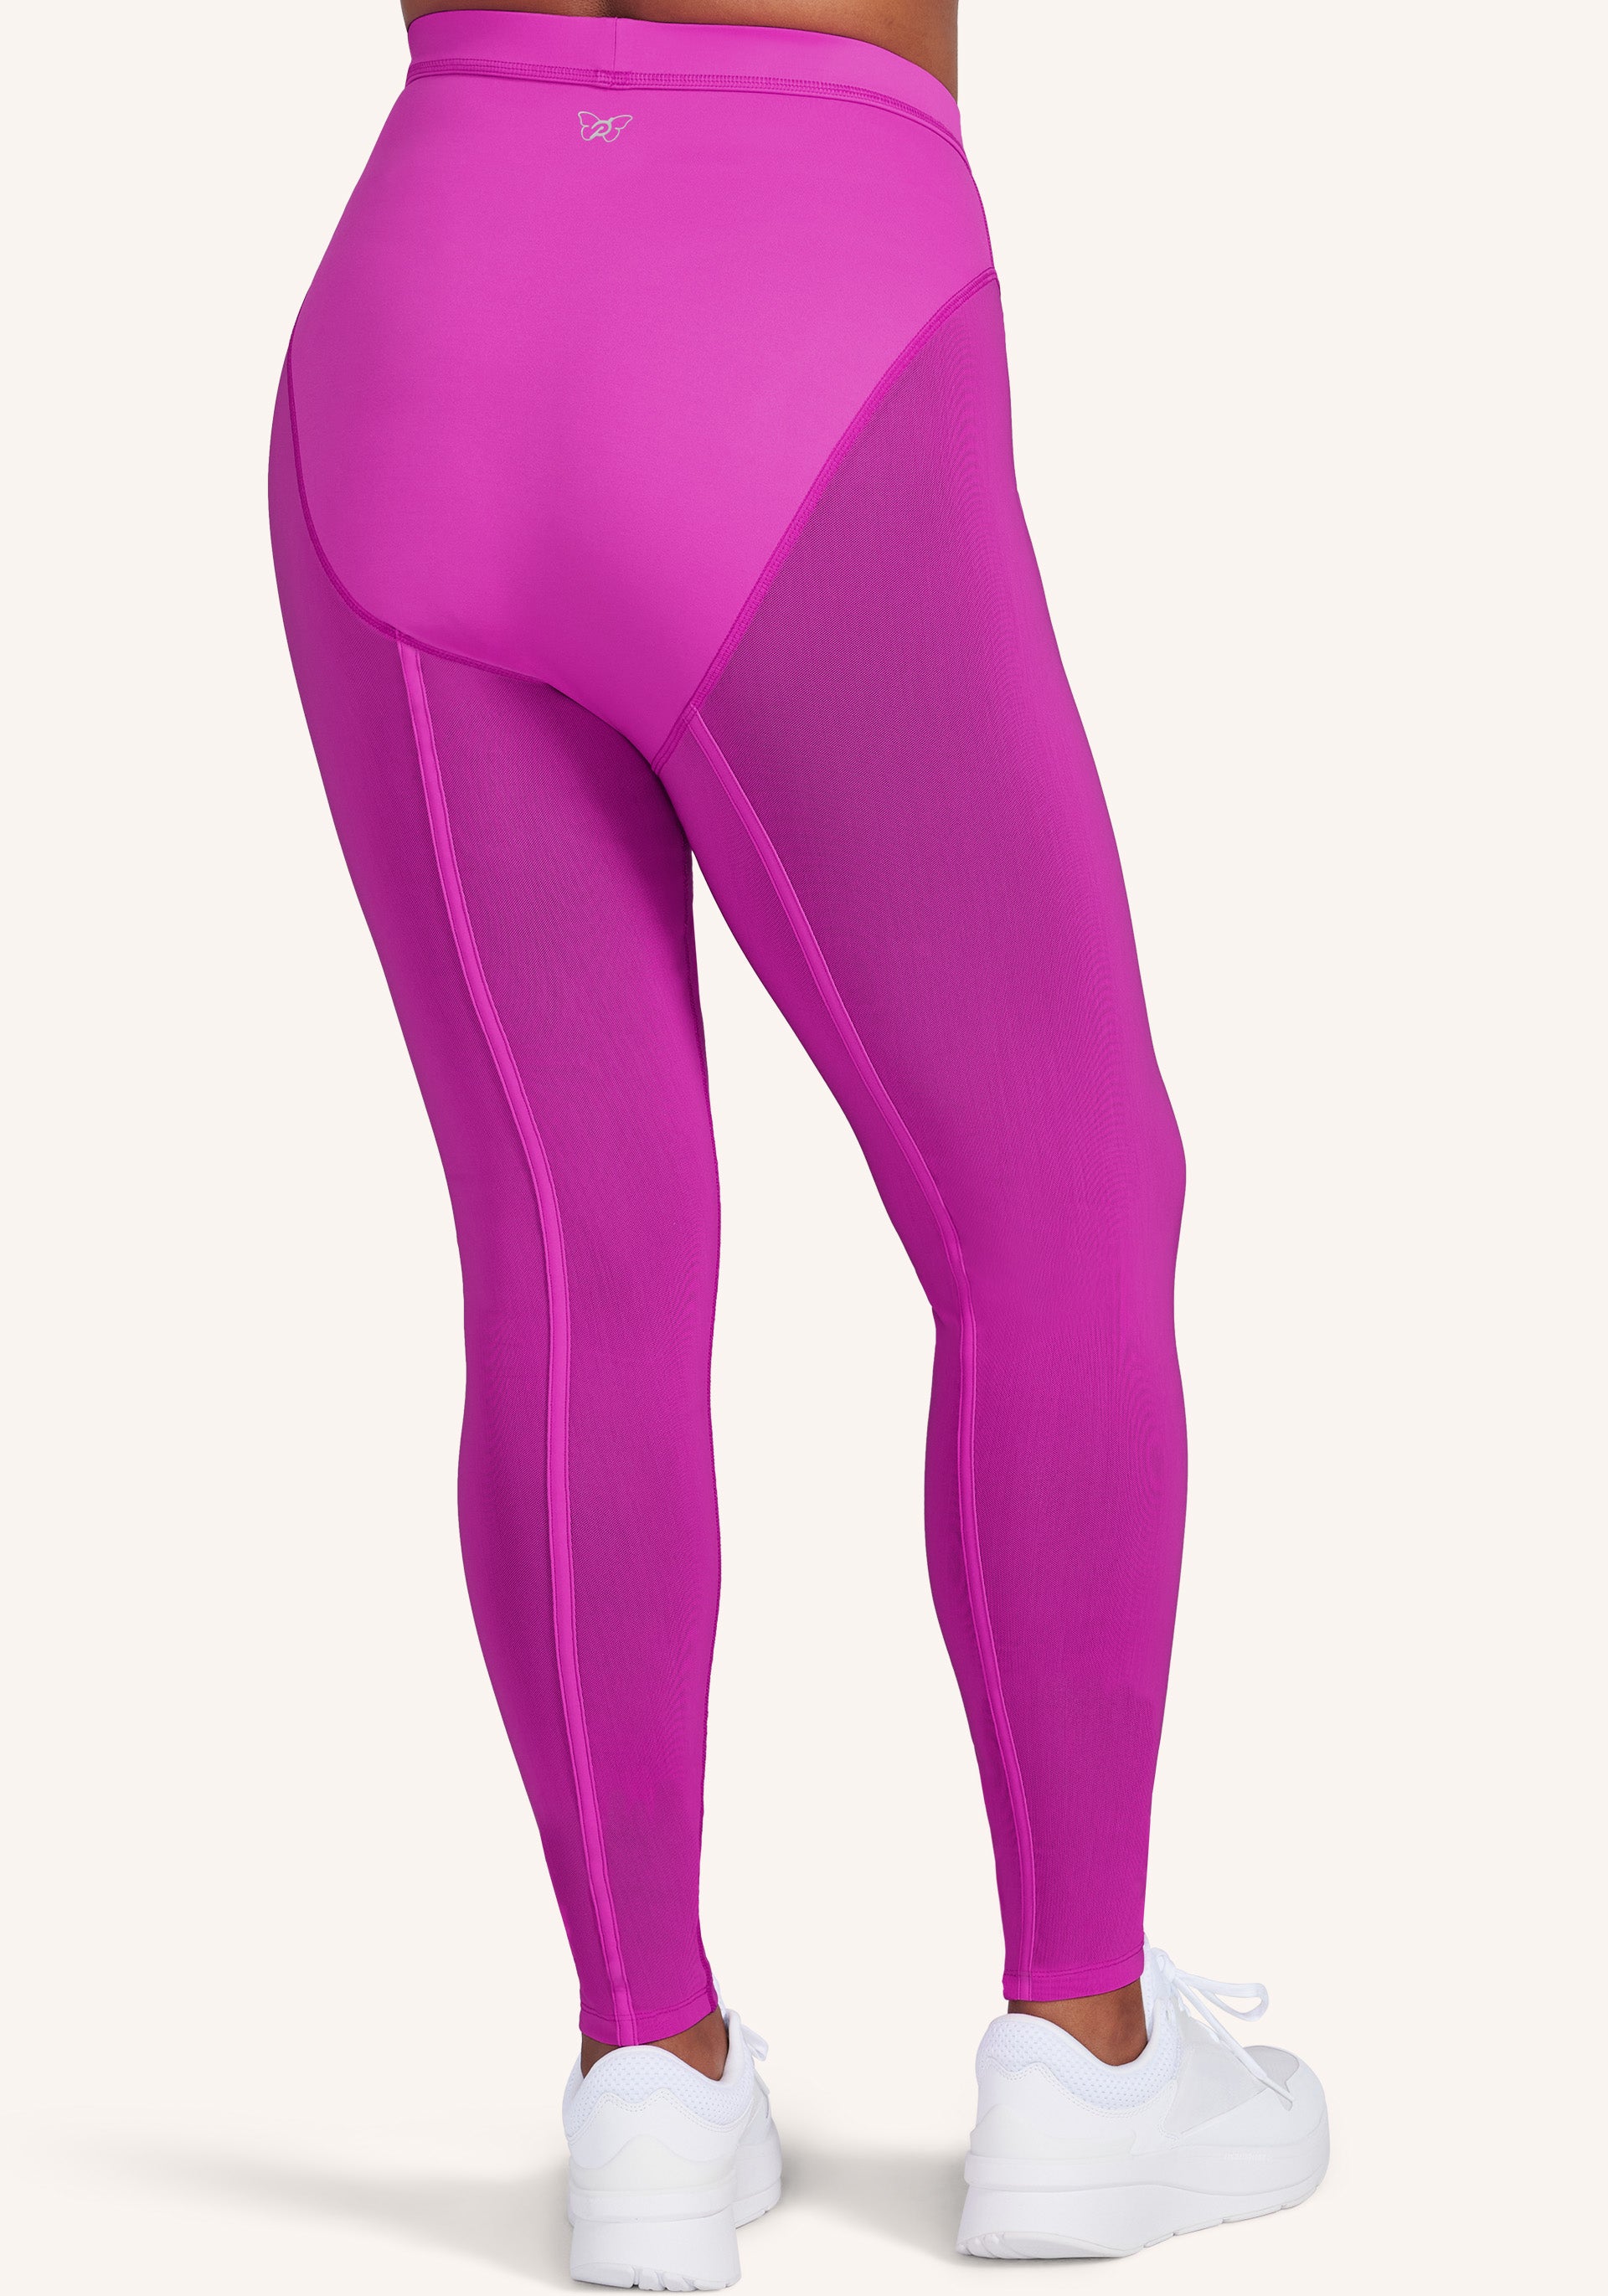 Peloton Women's Solid Flex Legging NWT! Pink Size L - $85 New With Tags -  From Katie